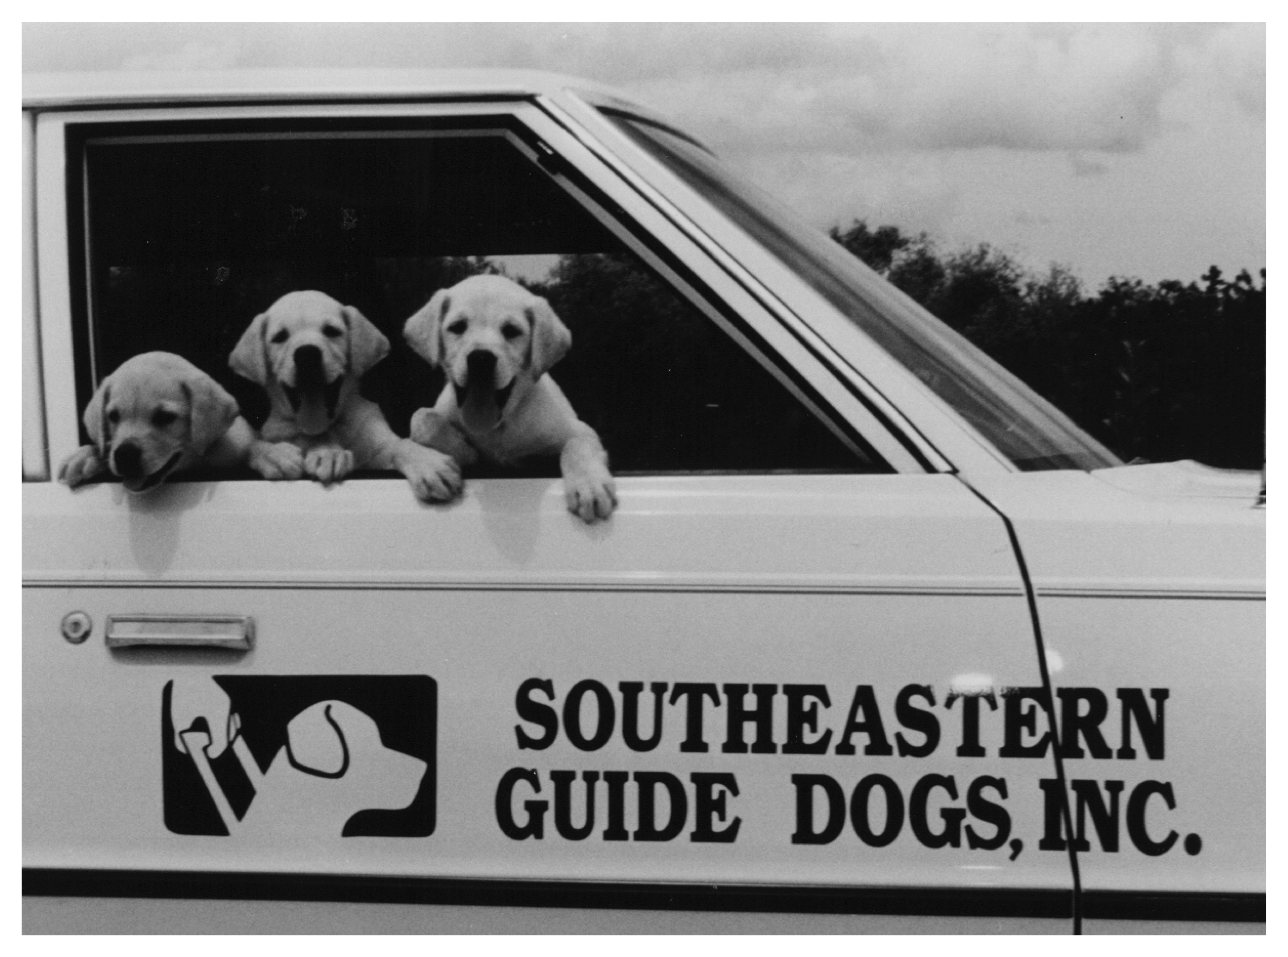 An old black and white photo of three yellow Labrador retriever puppies looking out of the window of an old car.